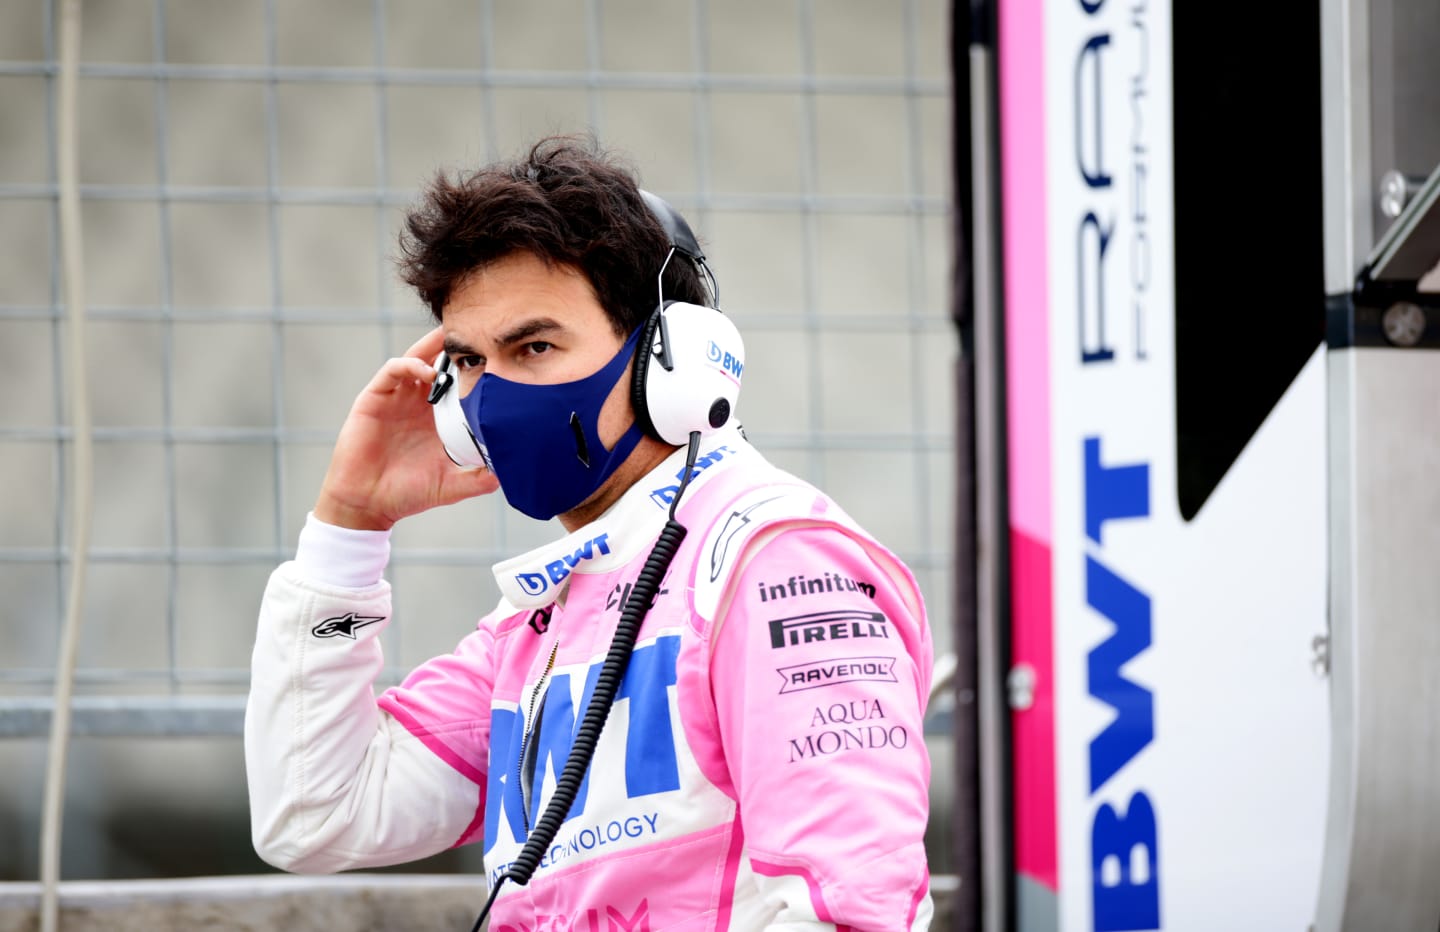 BUDAPEST, HUNGARY - JULY 17: Sergio Perez of Mexico and Racing Point looks on during practice for